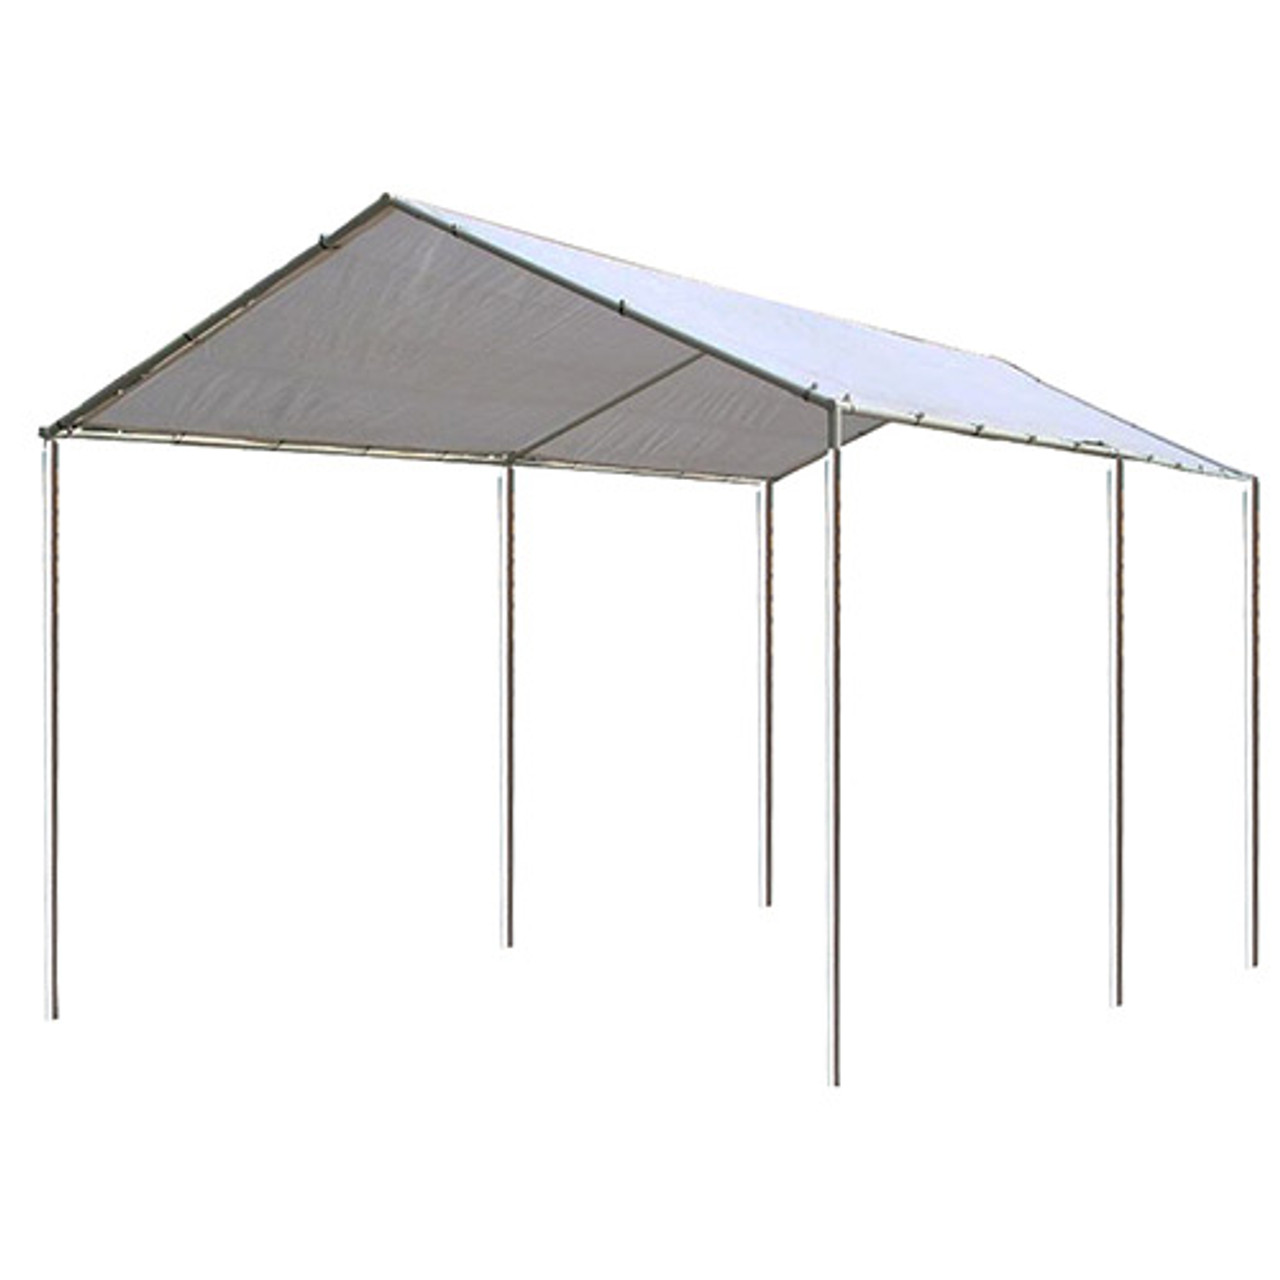 10' x 30' Traditional Canopy Tent 1-3/8" Diameter Frame